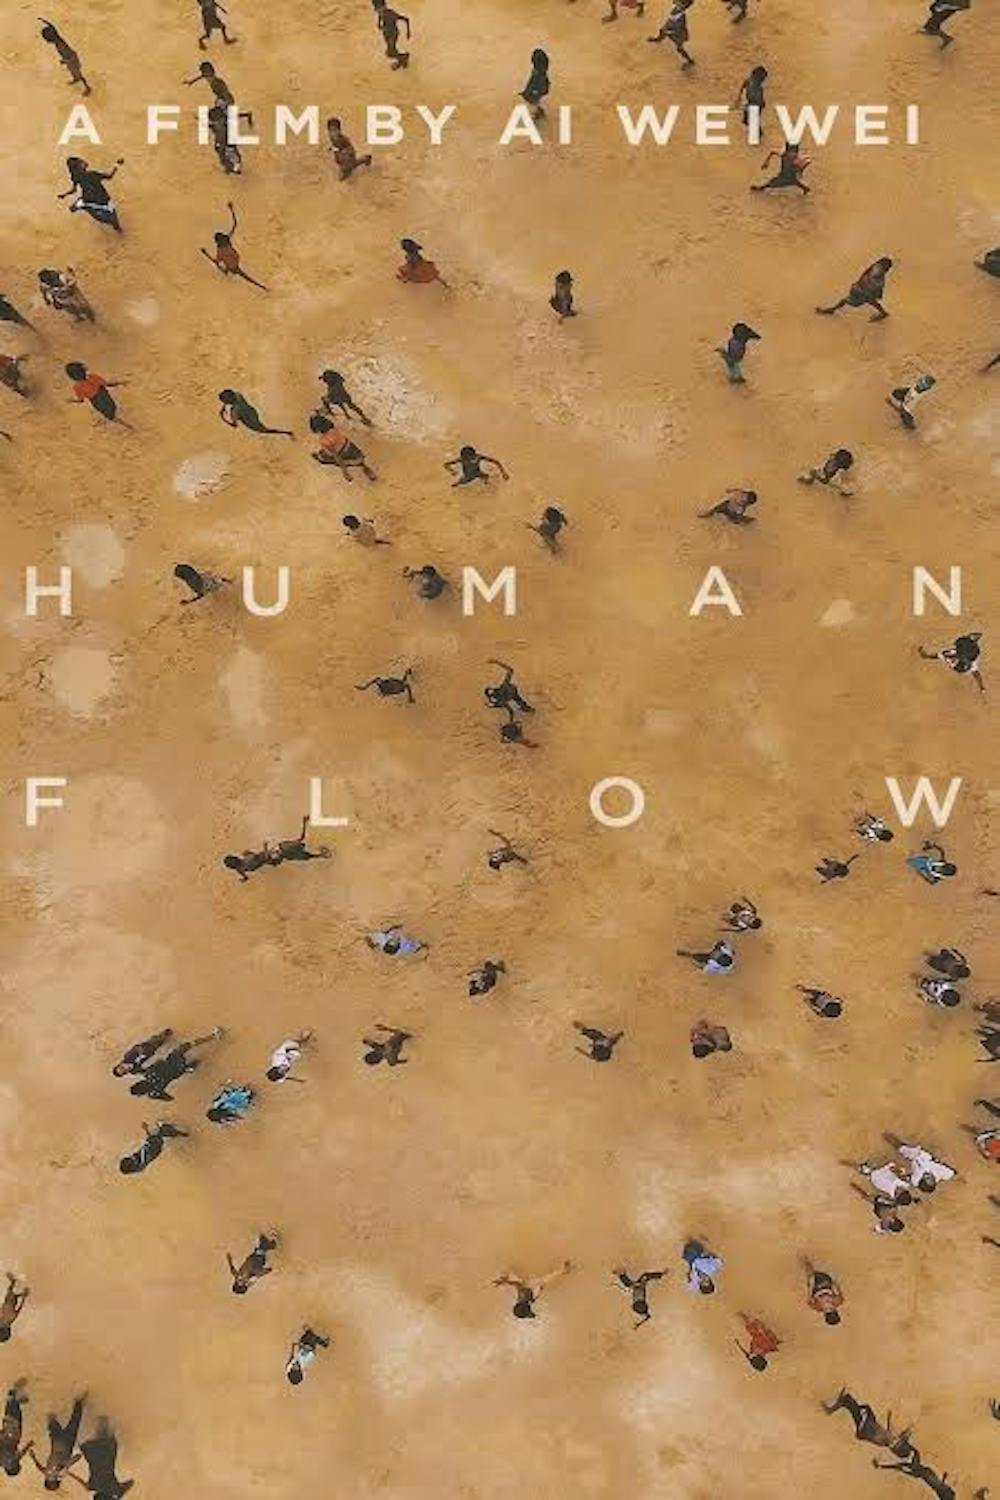 Middlebury last screened “Human Flow” in March 2022.